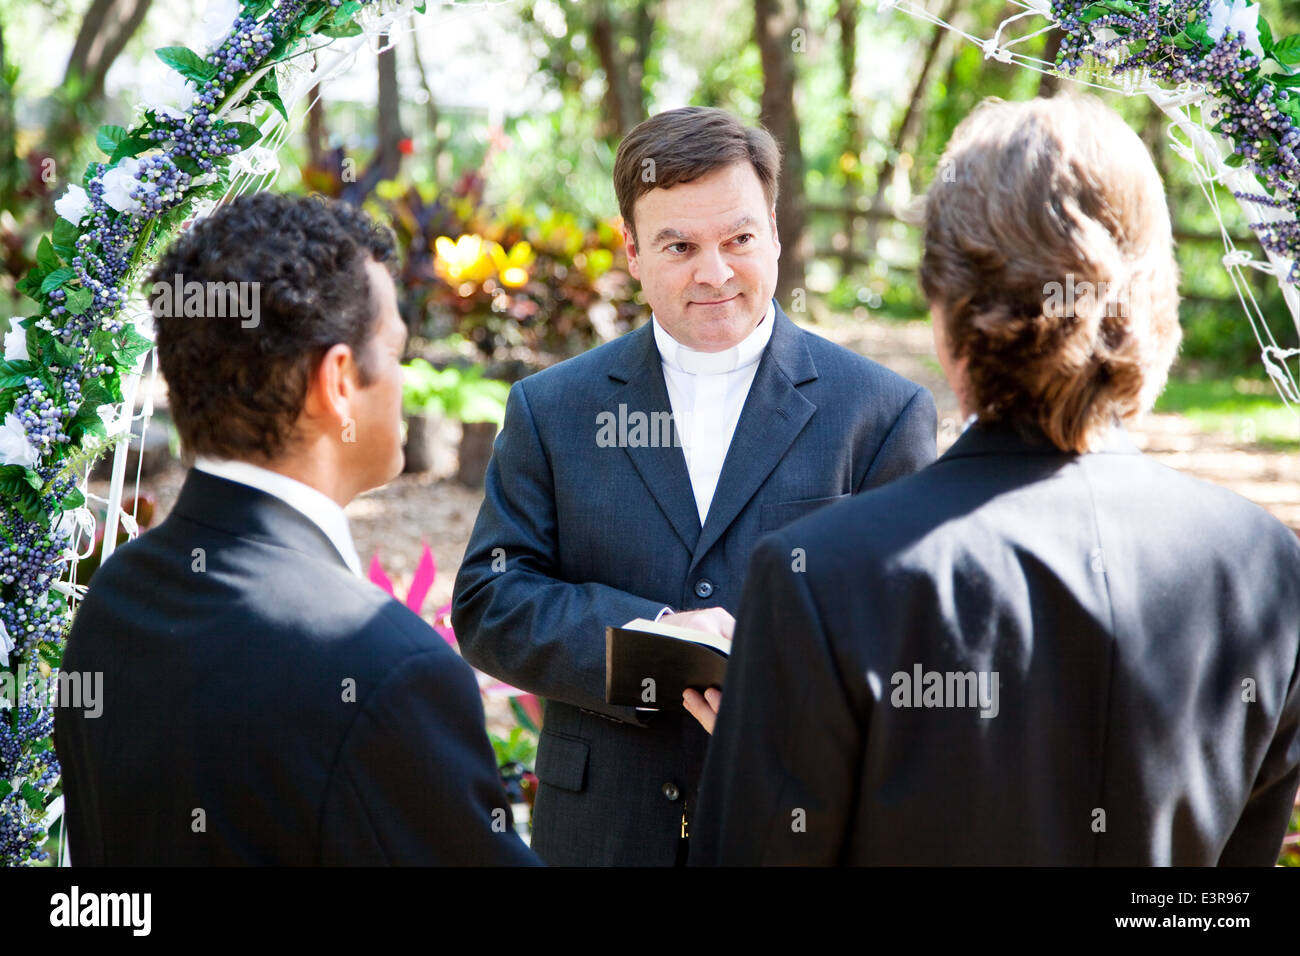 Minister performing marriage ceremony for two grooms at a gay wedding.  Stock Photo